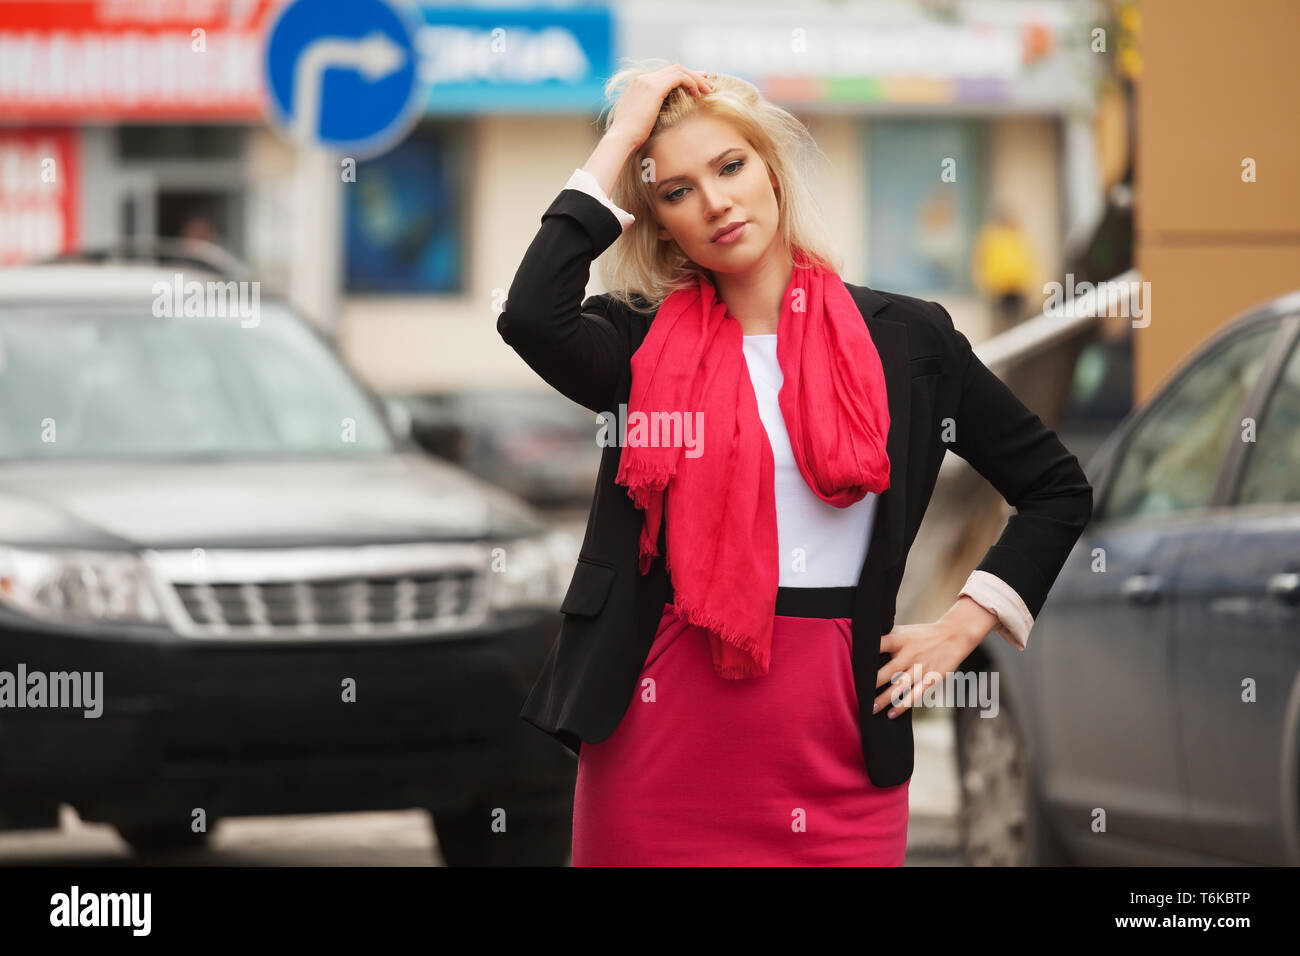 Young fashion business woman walking in city street Stylish female model wearing black suit jacket and red scarf outdoor Stock Photo